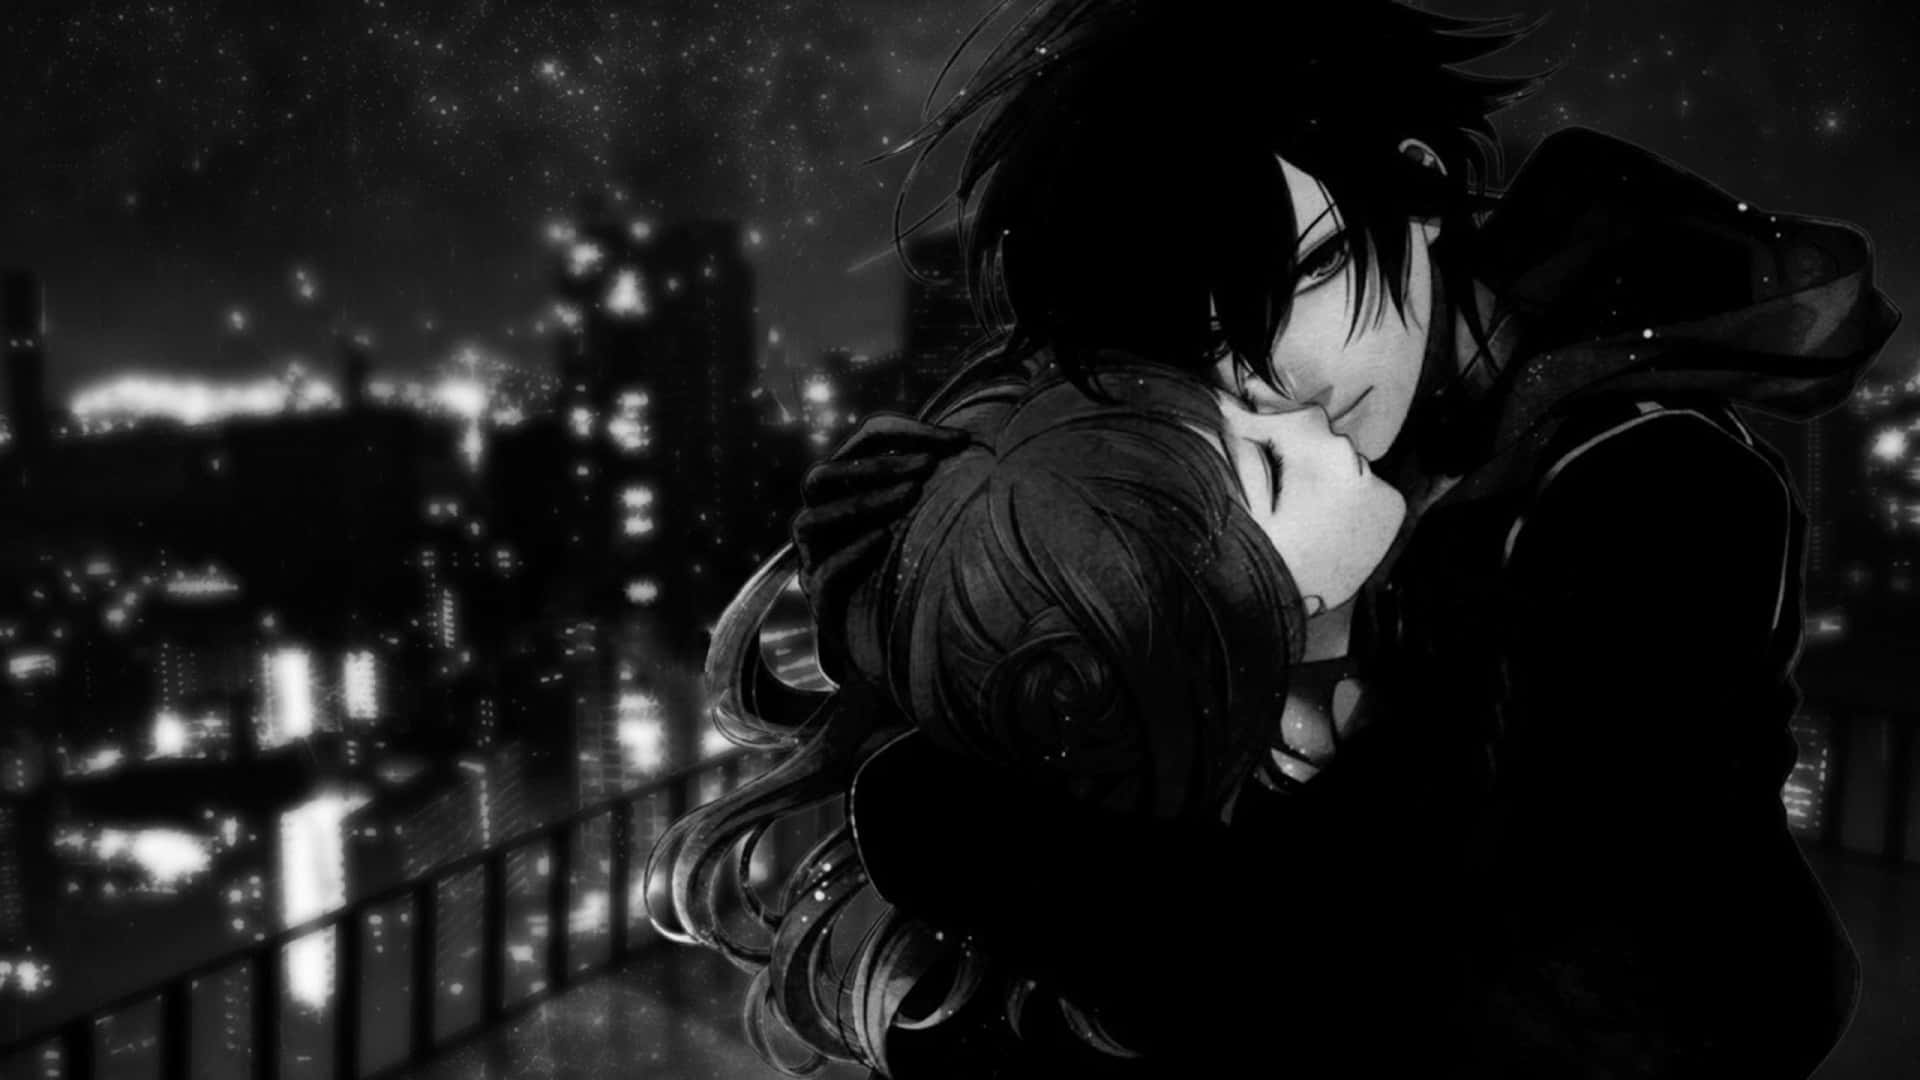 cute anime couples kissing in black and white